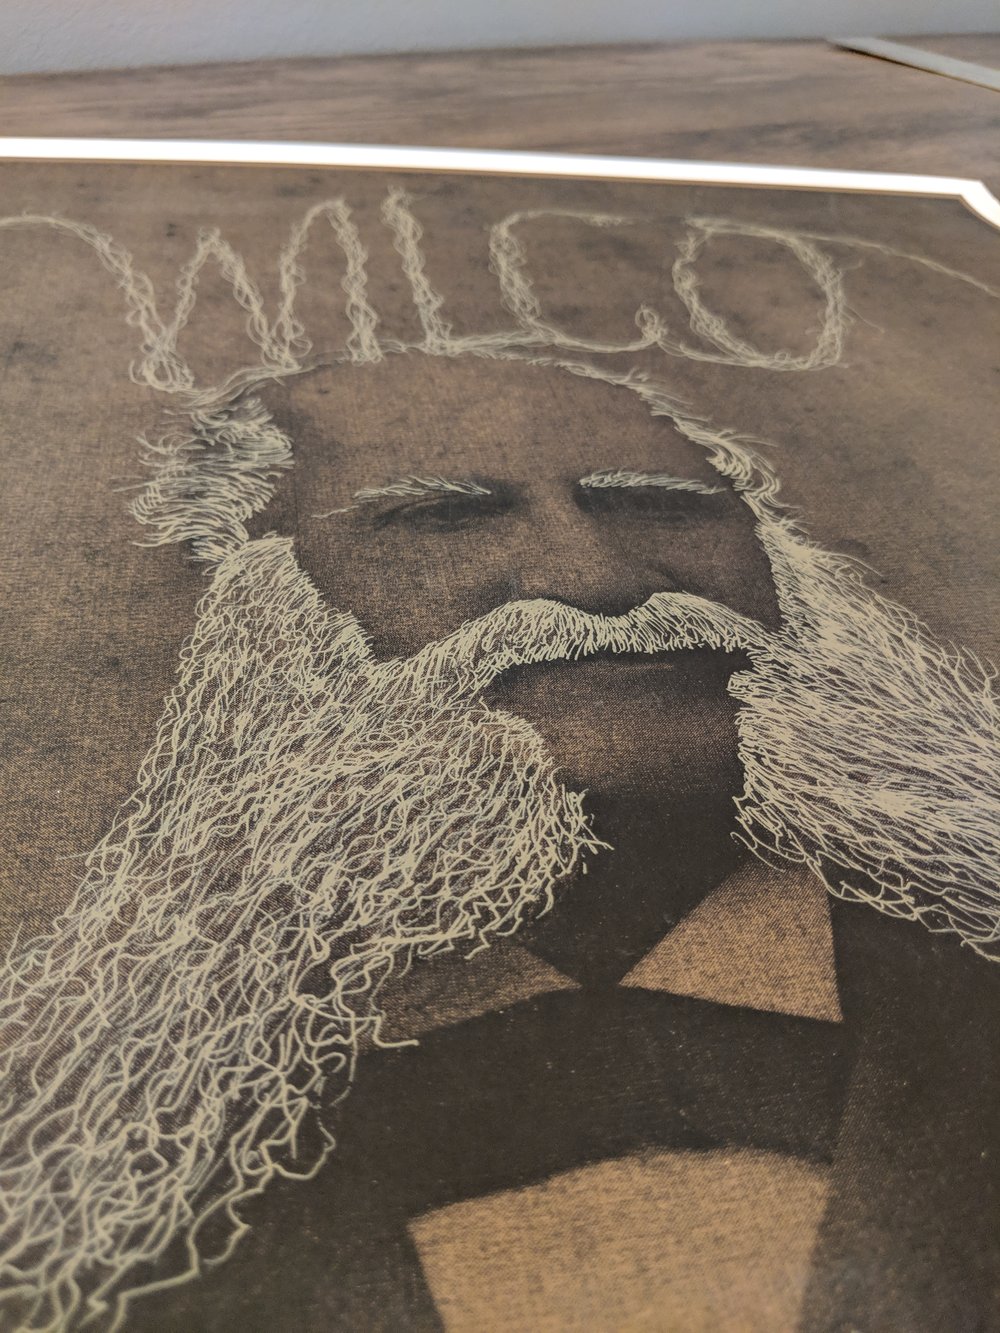 Wilco, North American Spring tour poster 2008